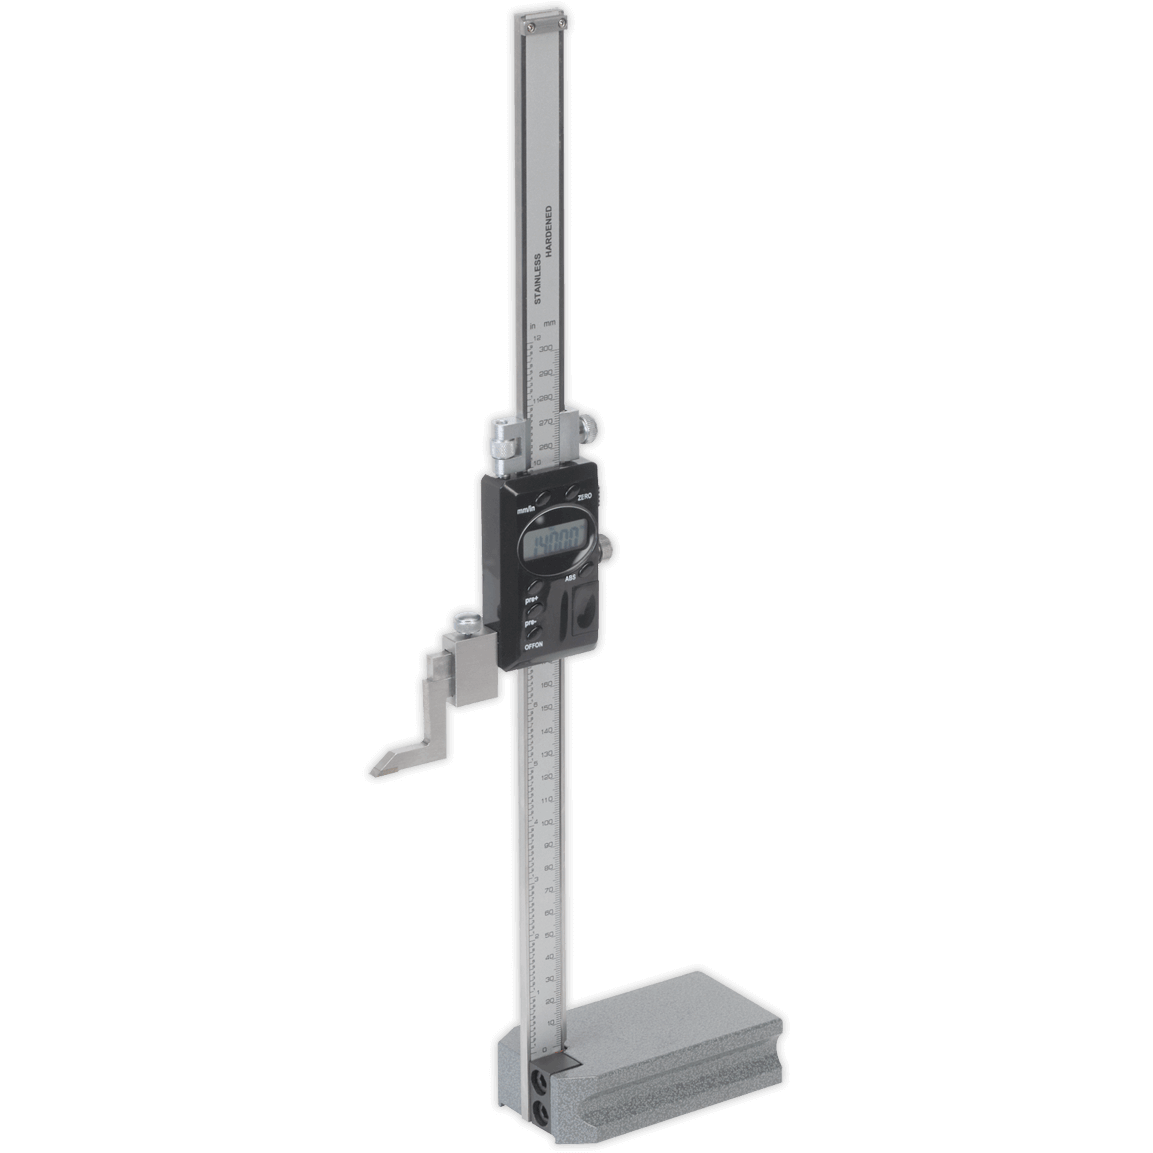 Photos - Other for Construction Sealey Digital Height Gauge AK9636D 